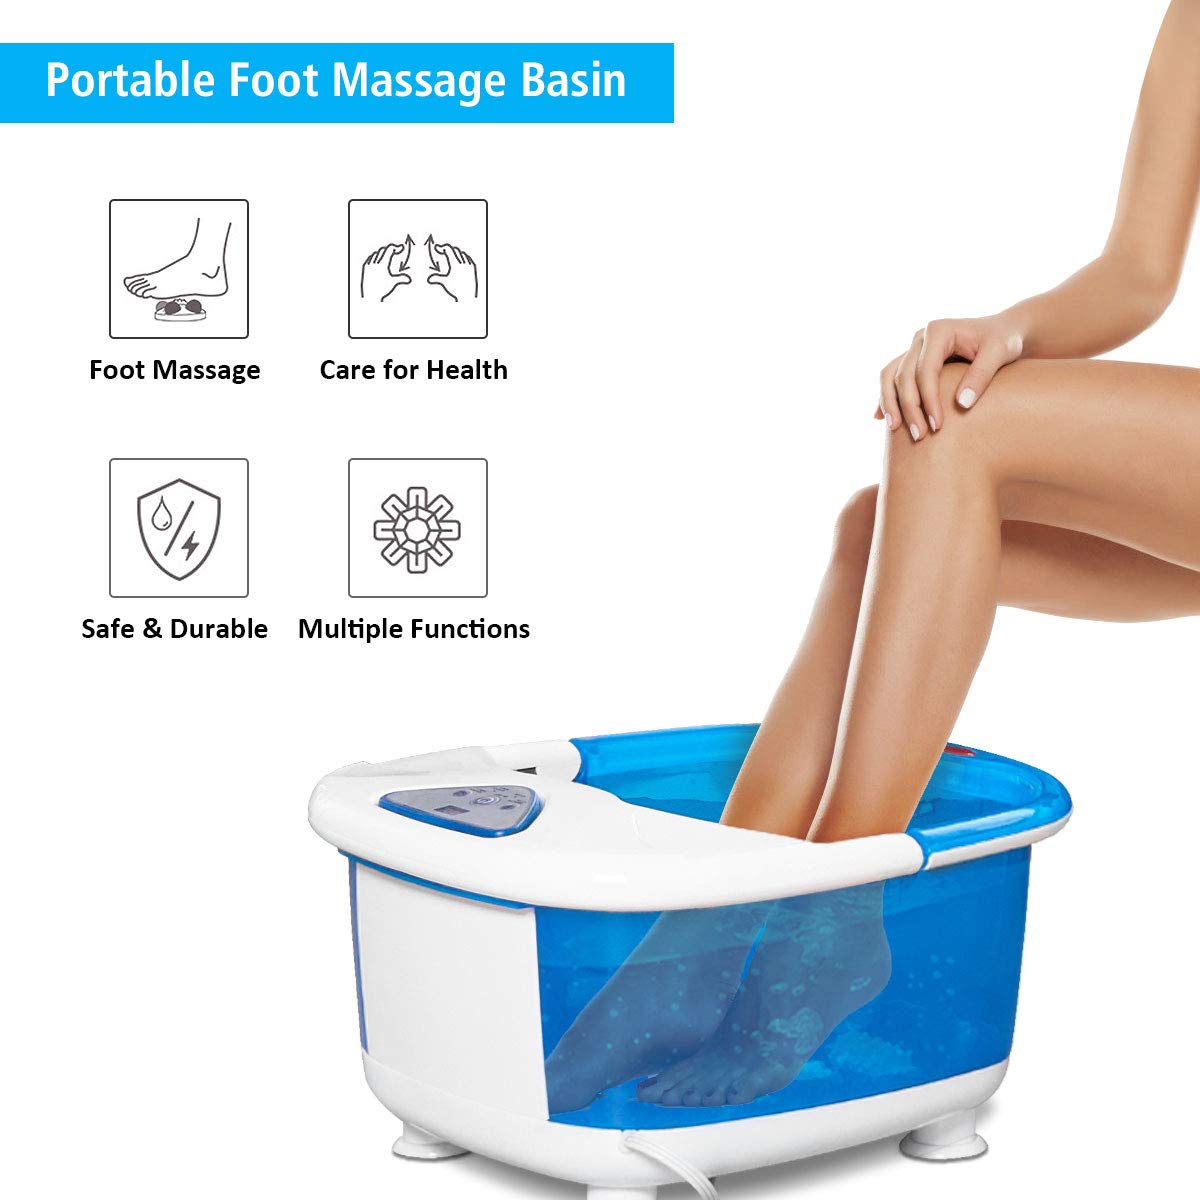 Giantex Foot Spa Bath Massager with Heat, Bubbles Vibration and 4 Massage Rollers, Anti-Splash Water Guarder, Temperature Control, Pedicure Foot Massage Tub for Home Salon Use (Blue)